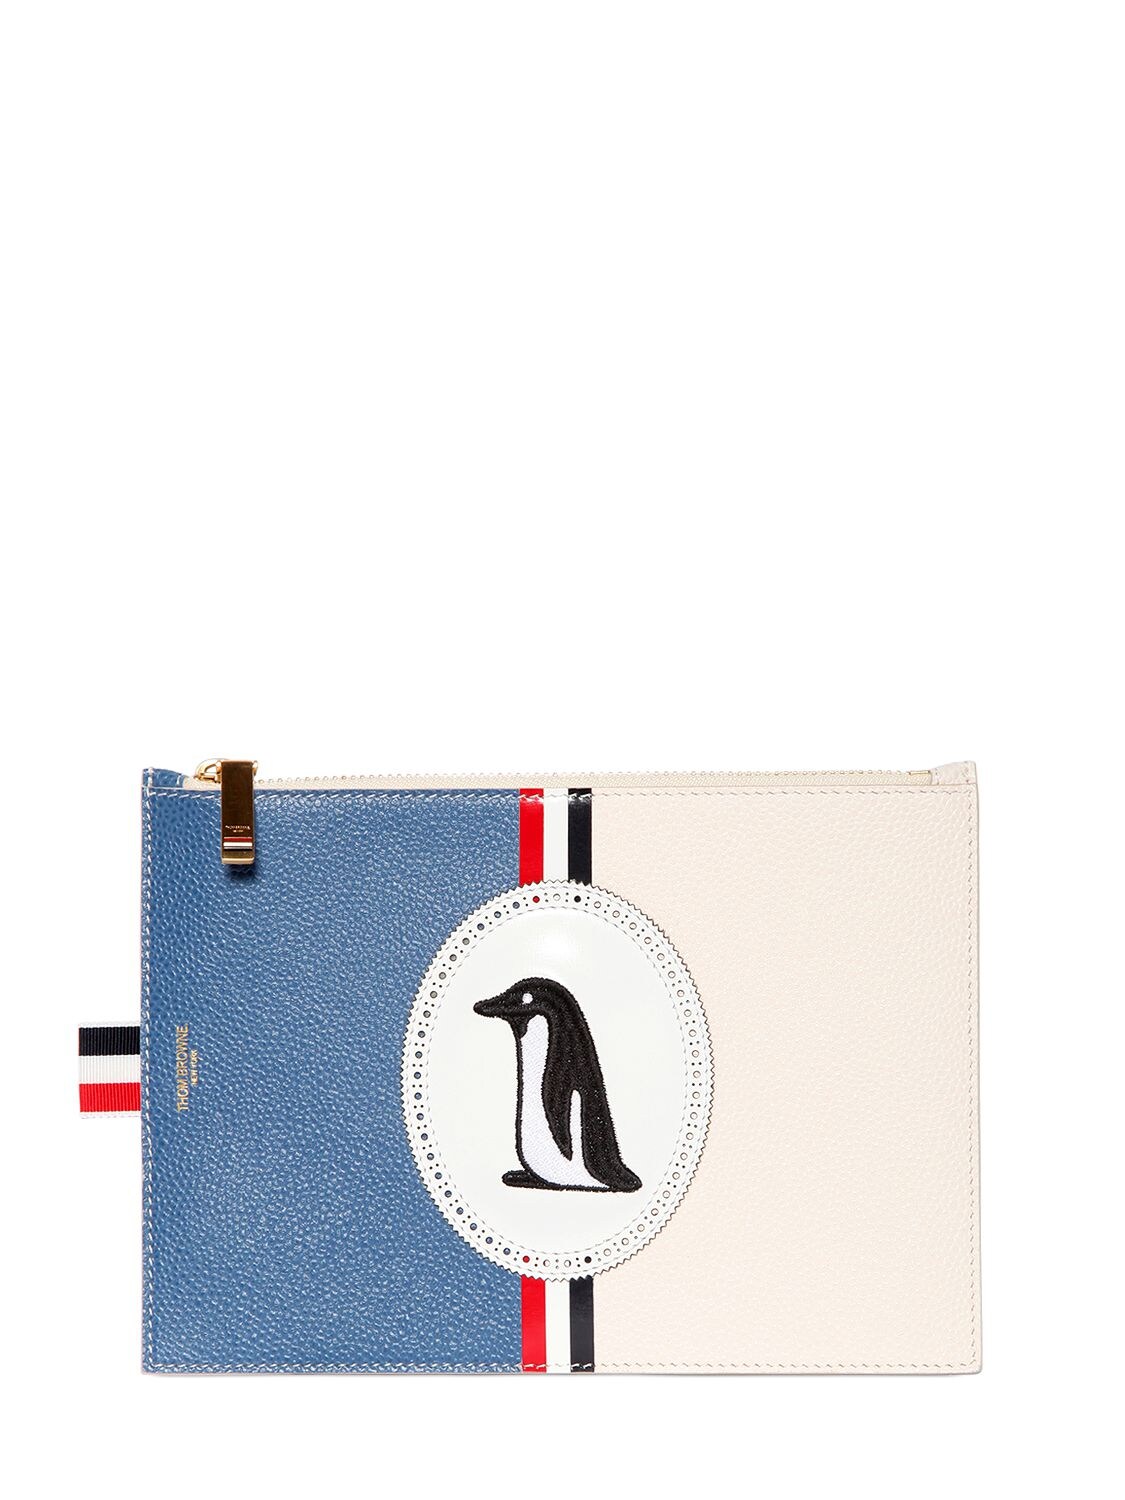 EXTRA SMALL PENGUIN PEBBLE LEATHER POUCH